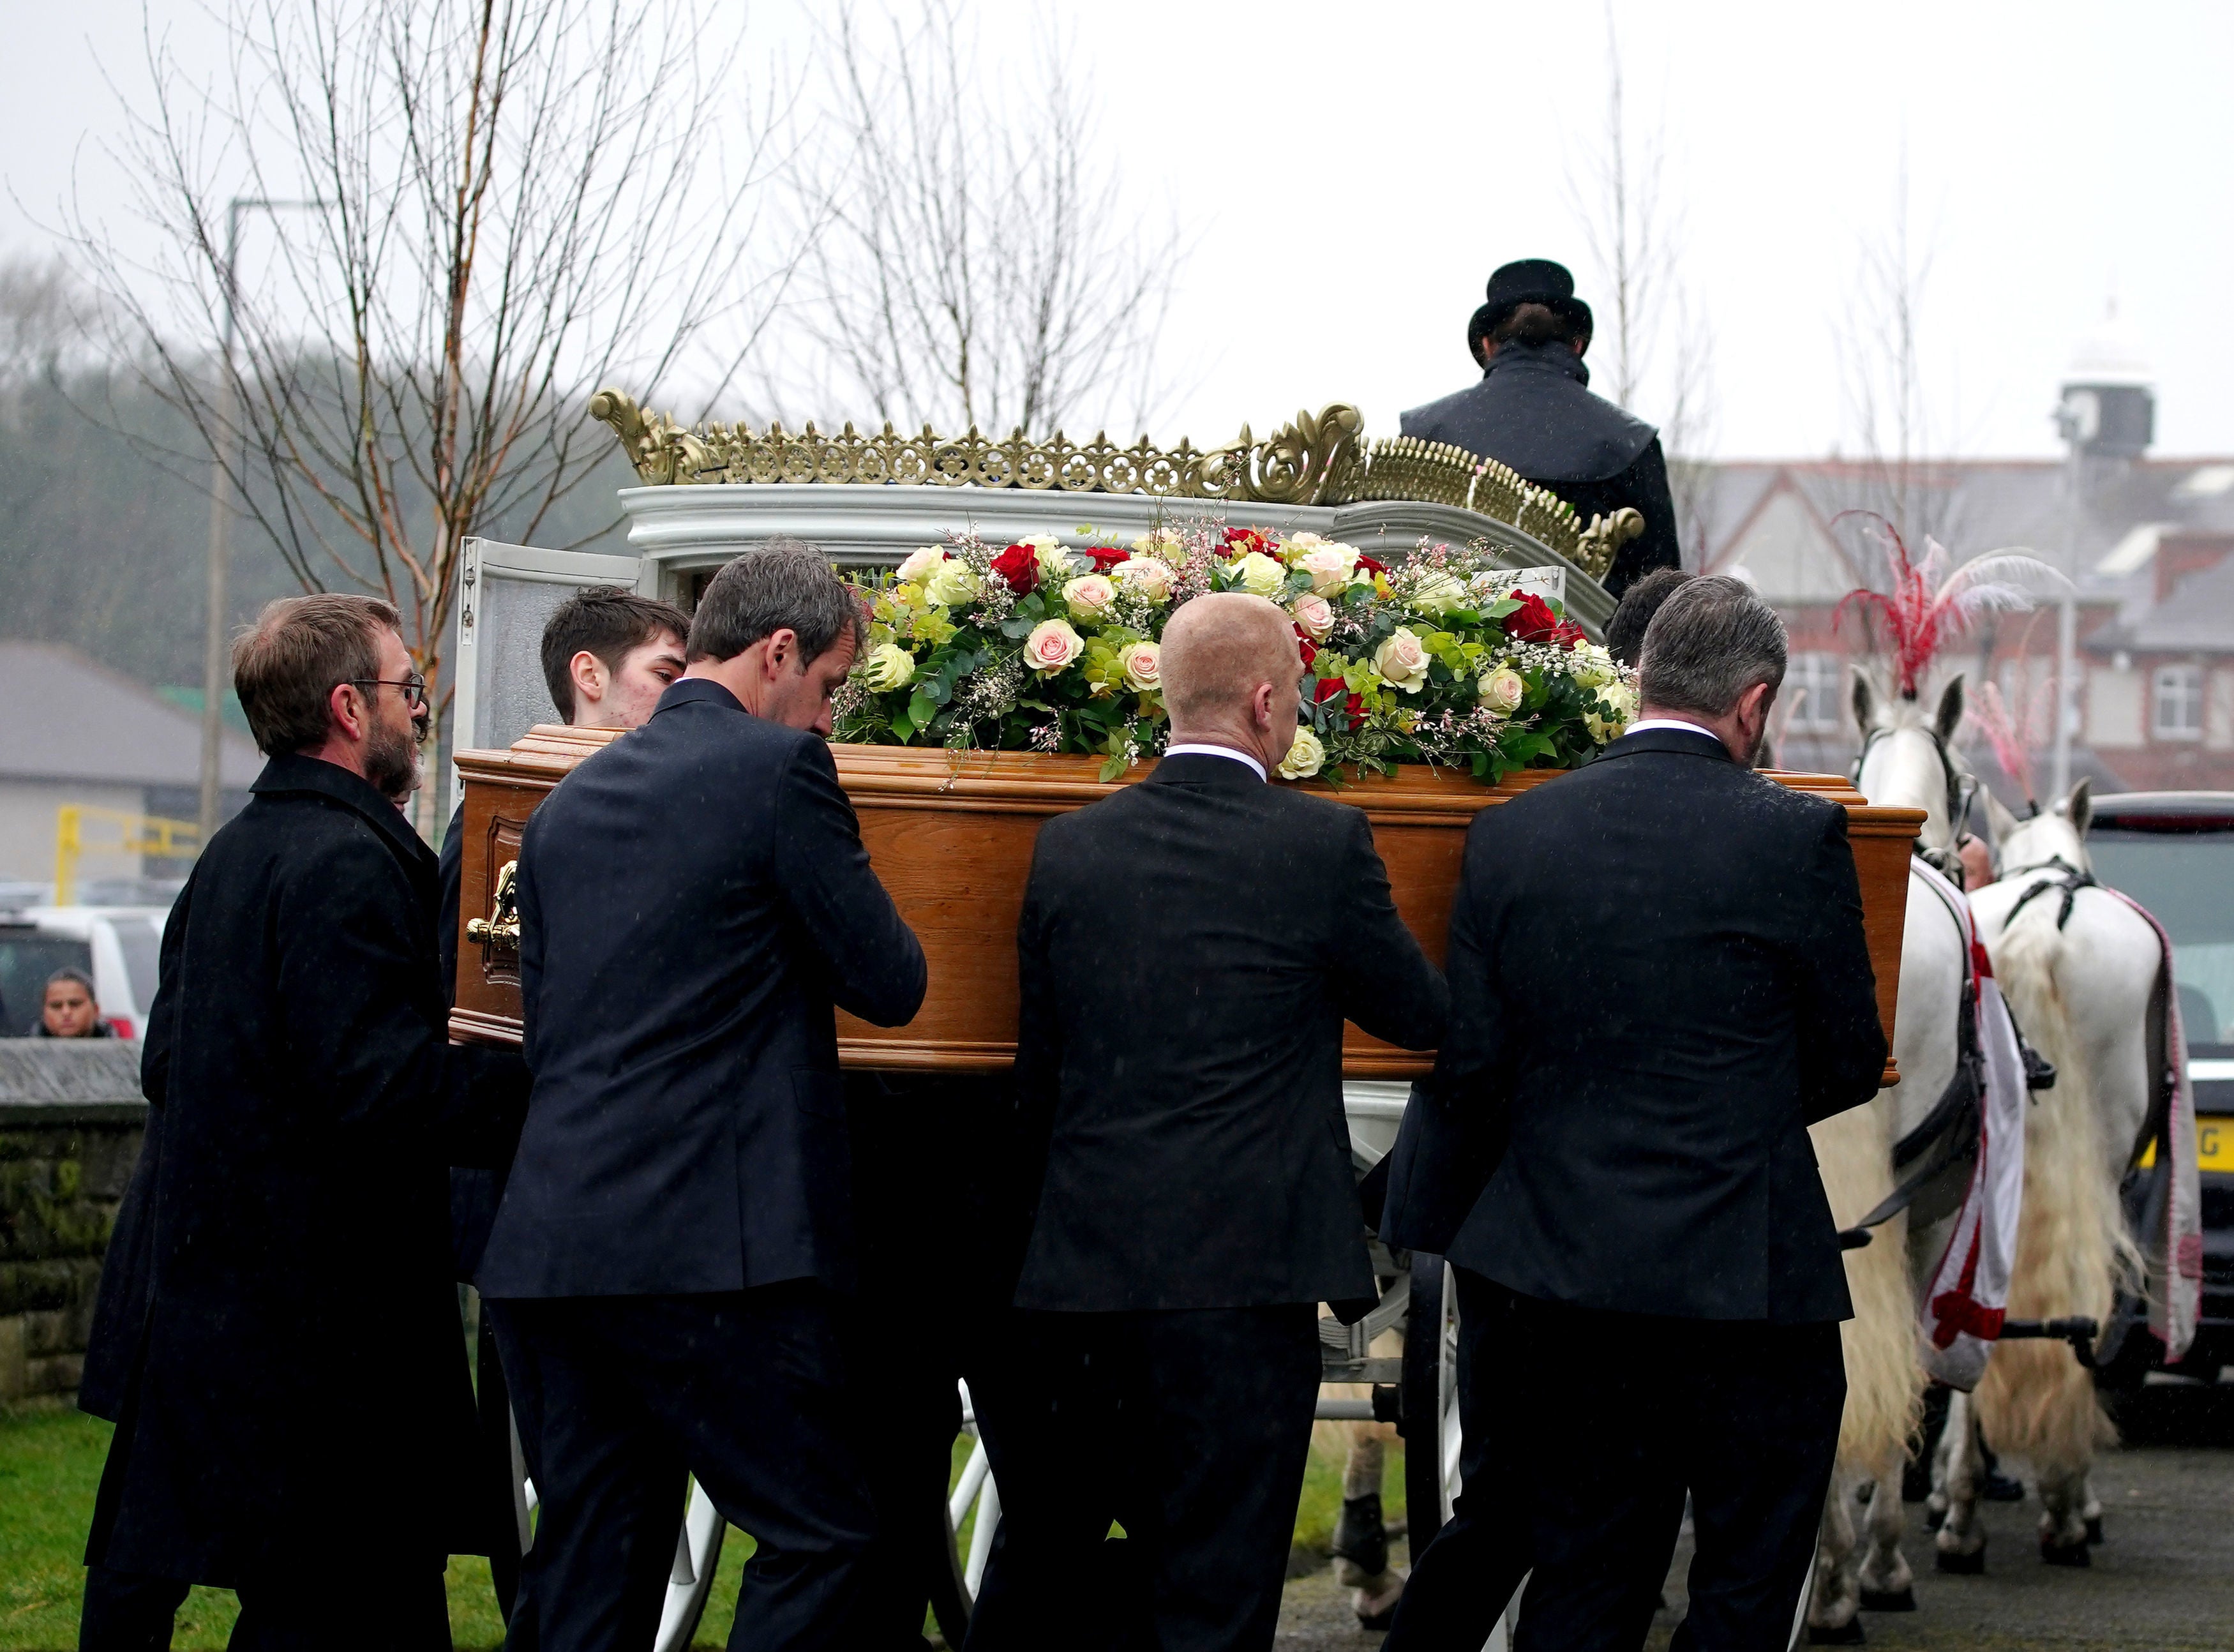 The bearer party carry Elle Edwards’ coffin into her funeral